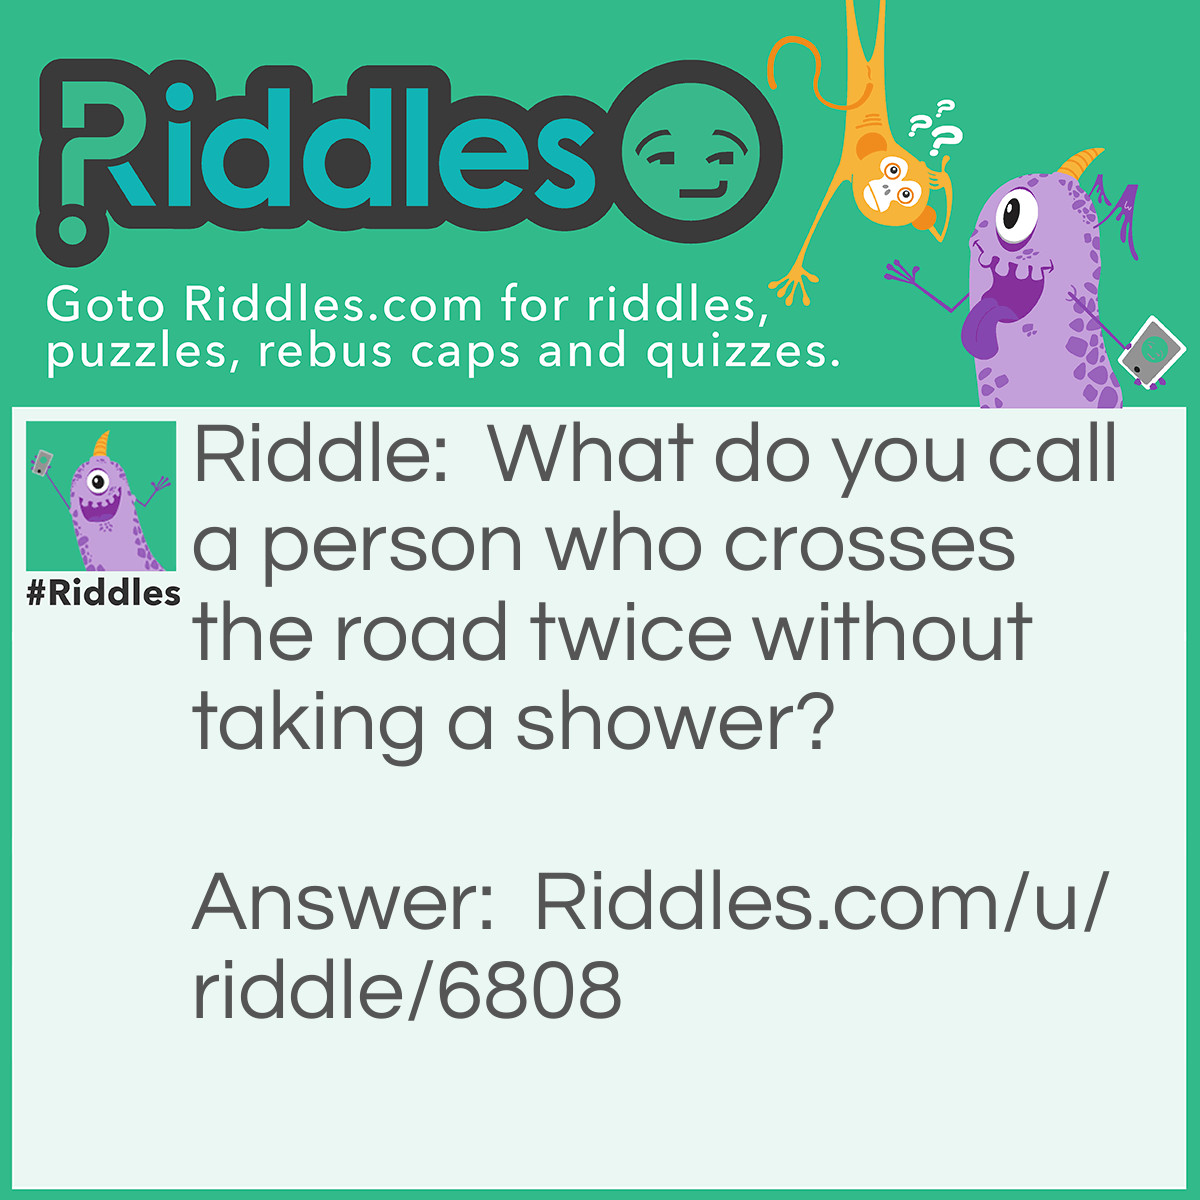 Riddle: What do you call a person who crosses the road twice without taking a shower? Answer: A dirty double crosser.